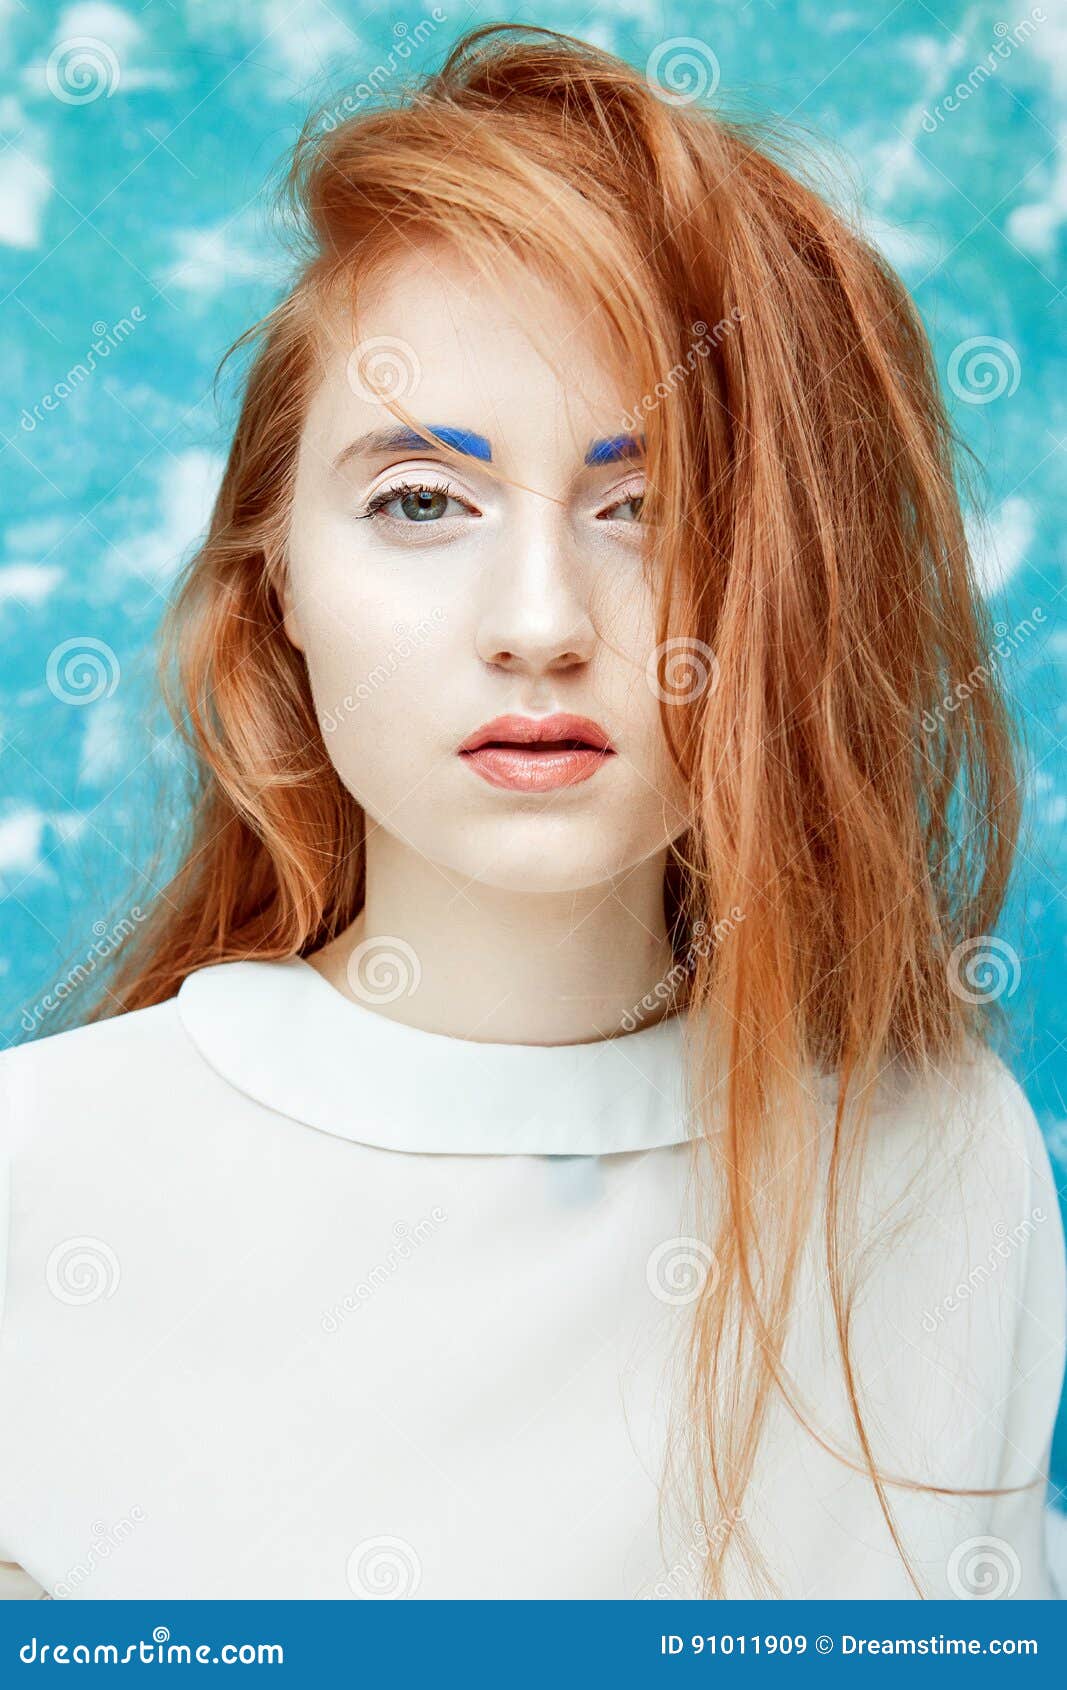 Ginger Hair Beauty Makeup Stock Image Image Of Woman 91011909